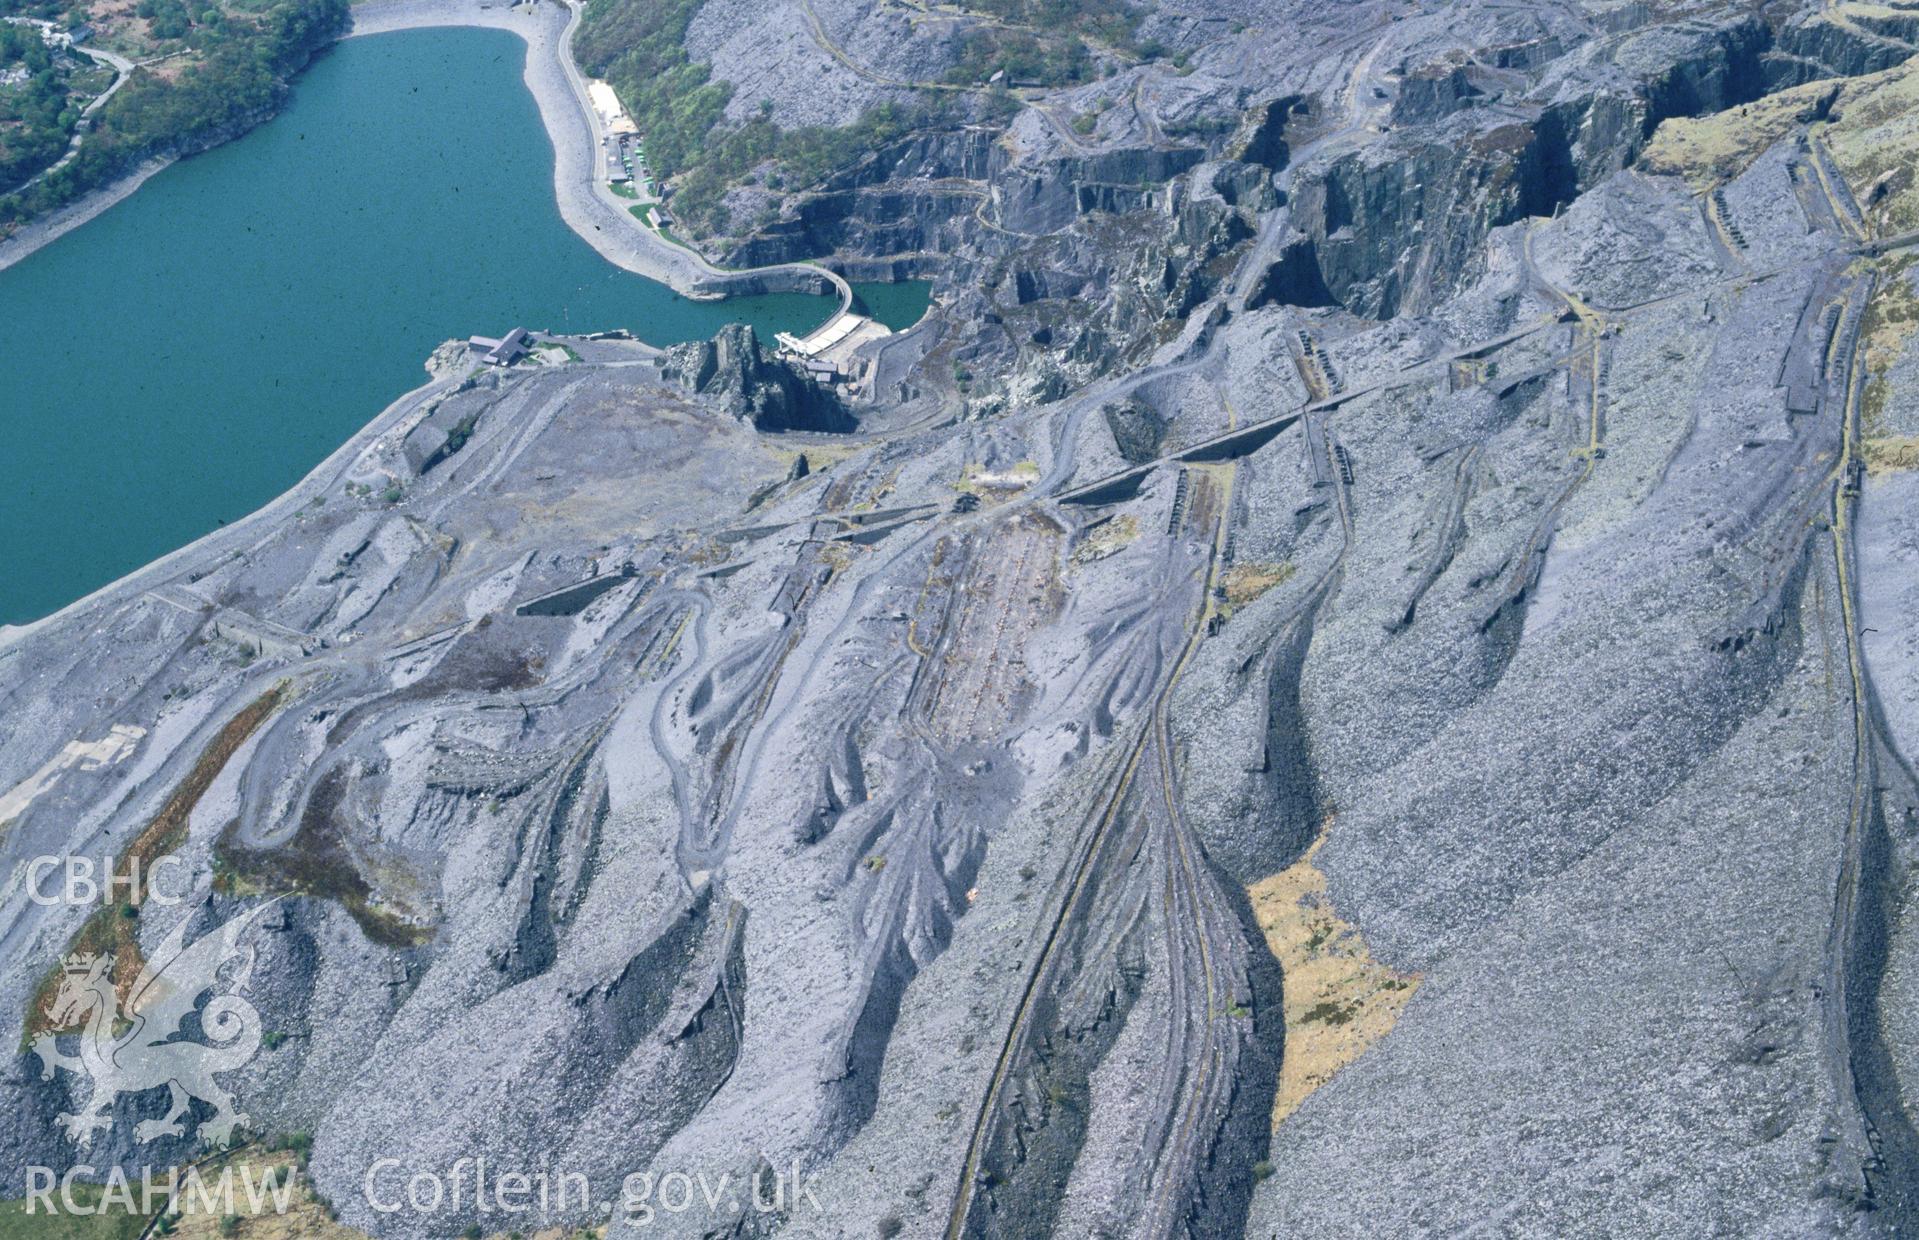 Slide of RCAHMW colour oblique aerial photograph of Dinorwic Slate Quarry, taken by C.R. Musson, 2/5/1994.